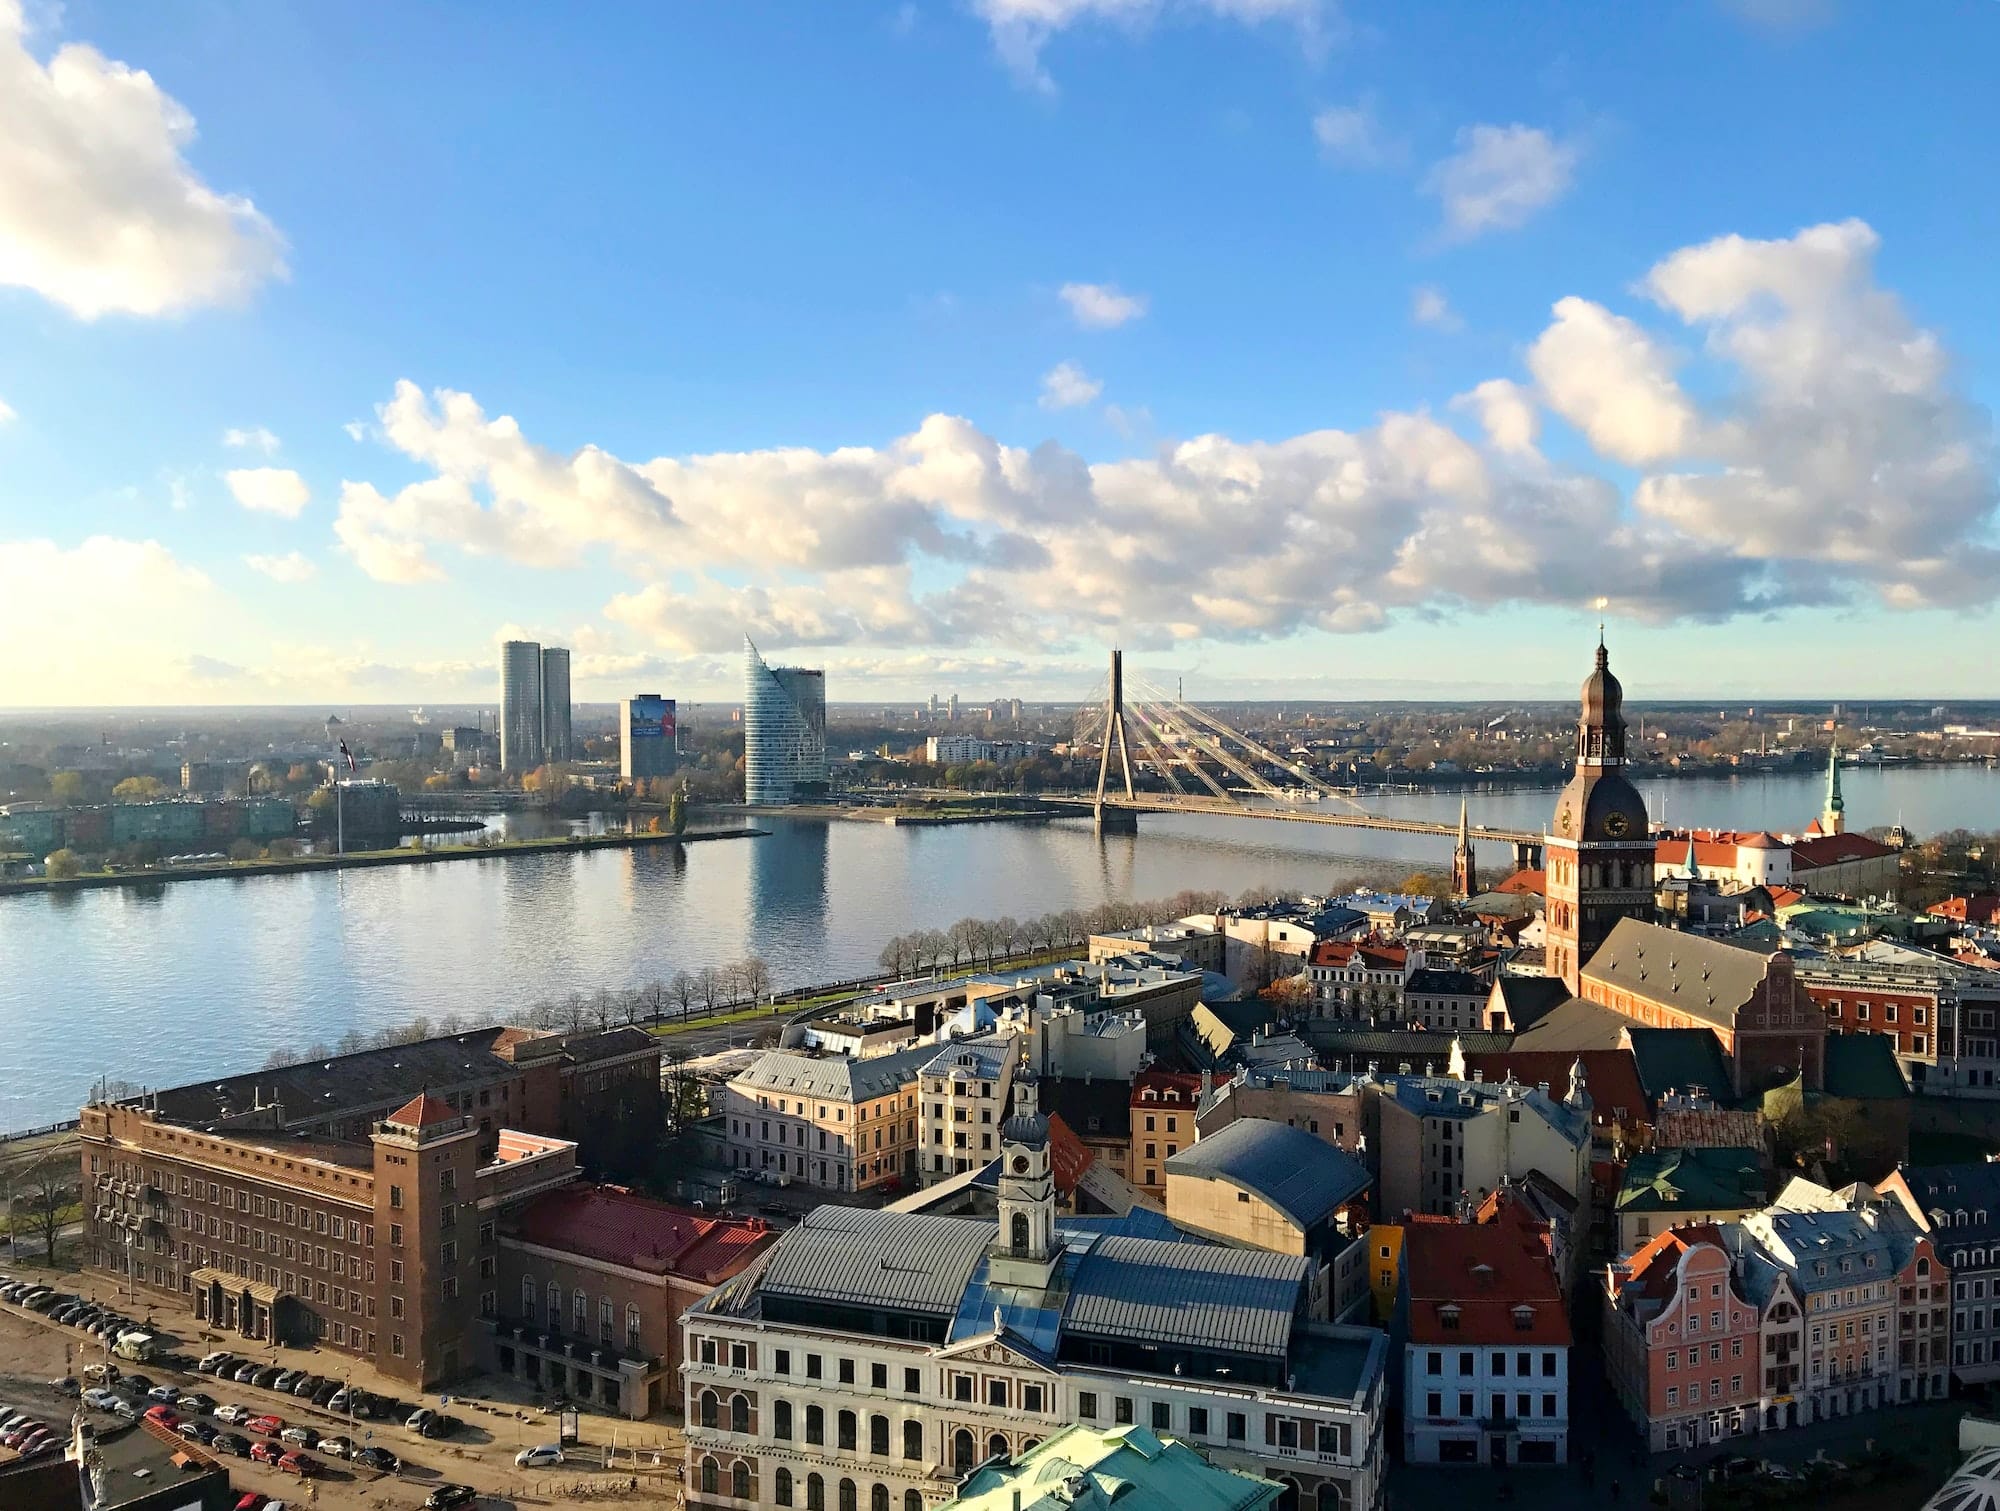 The city’s skyline of old Riga on the sunny day